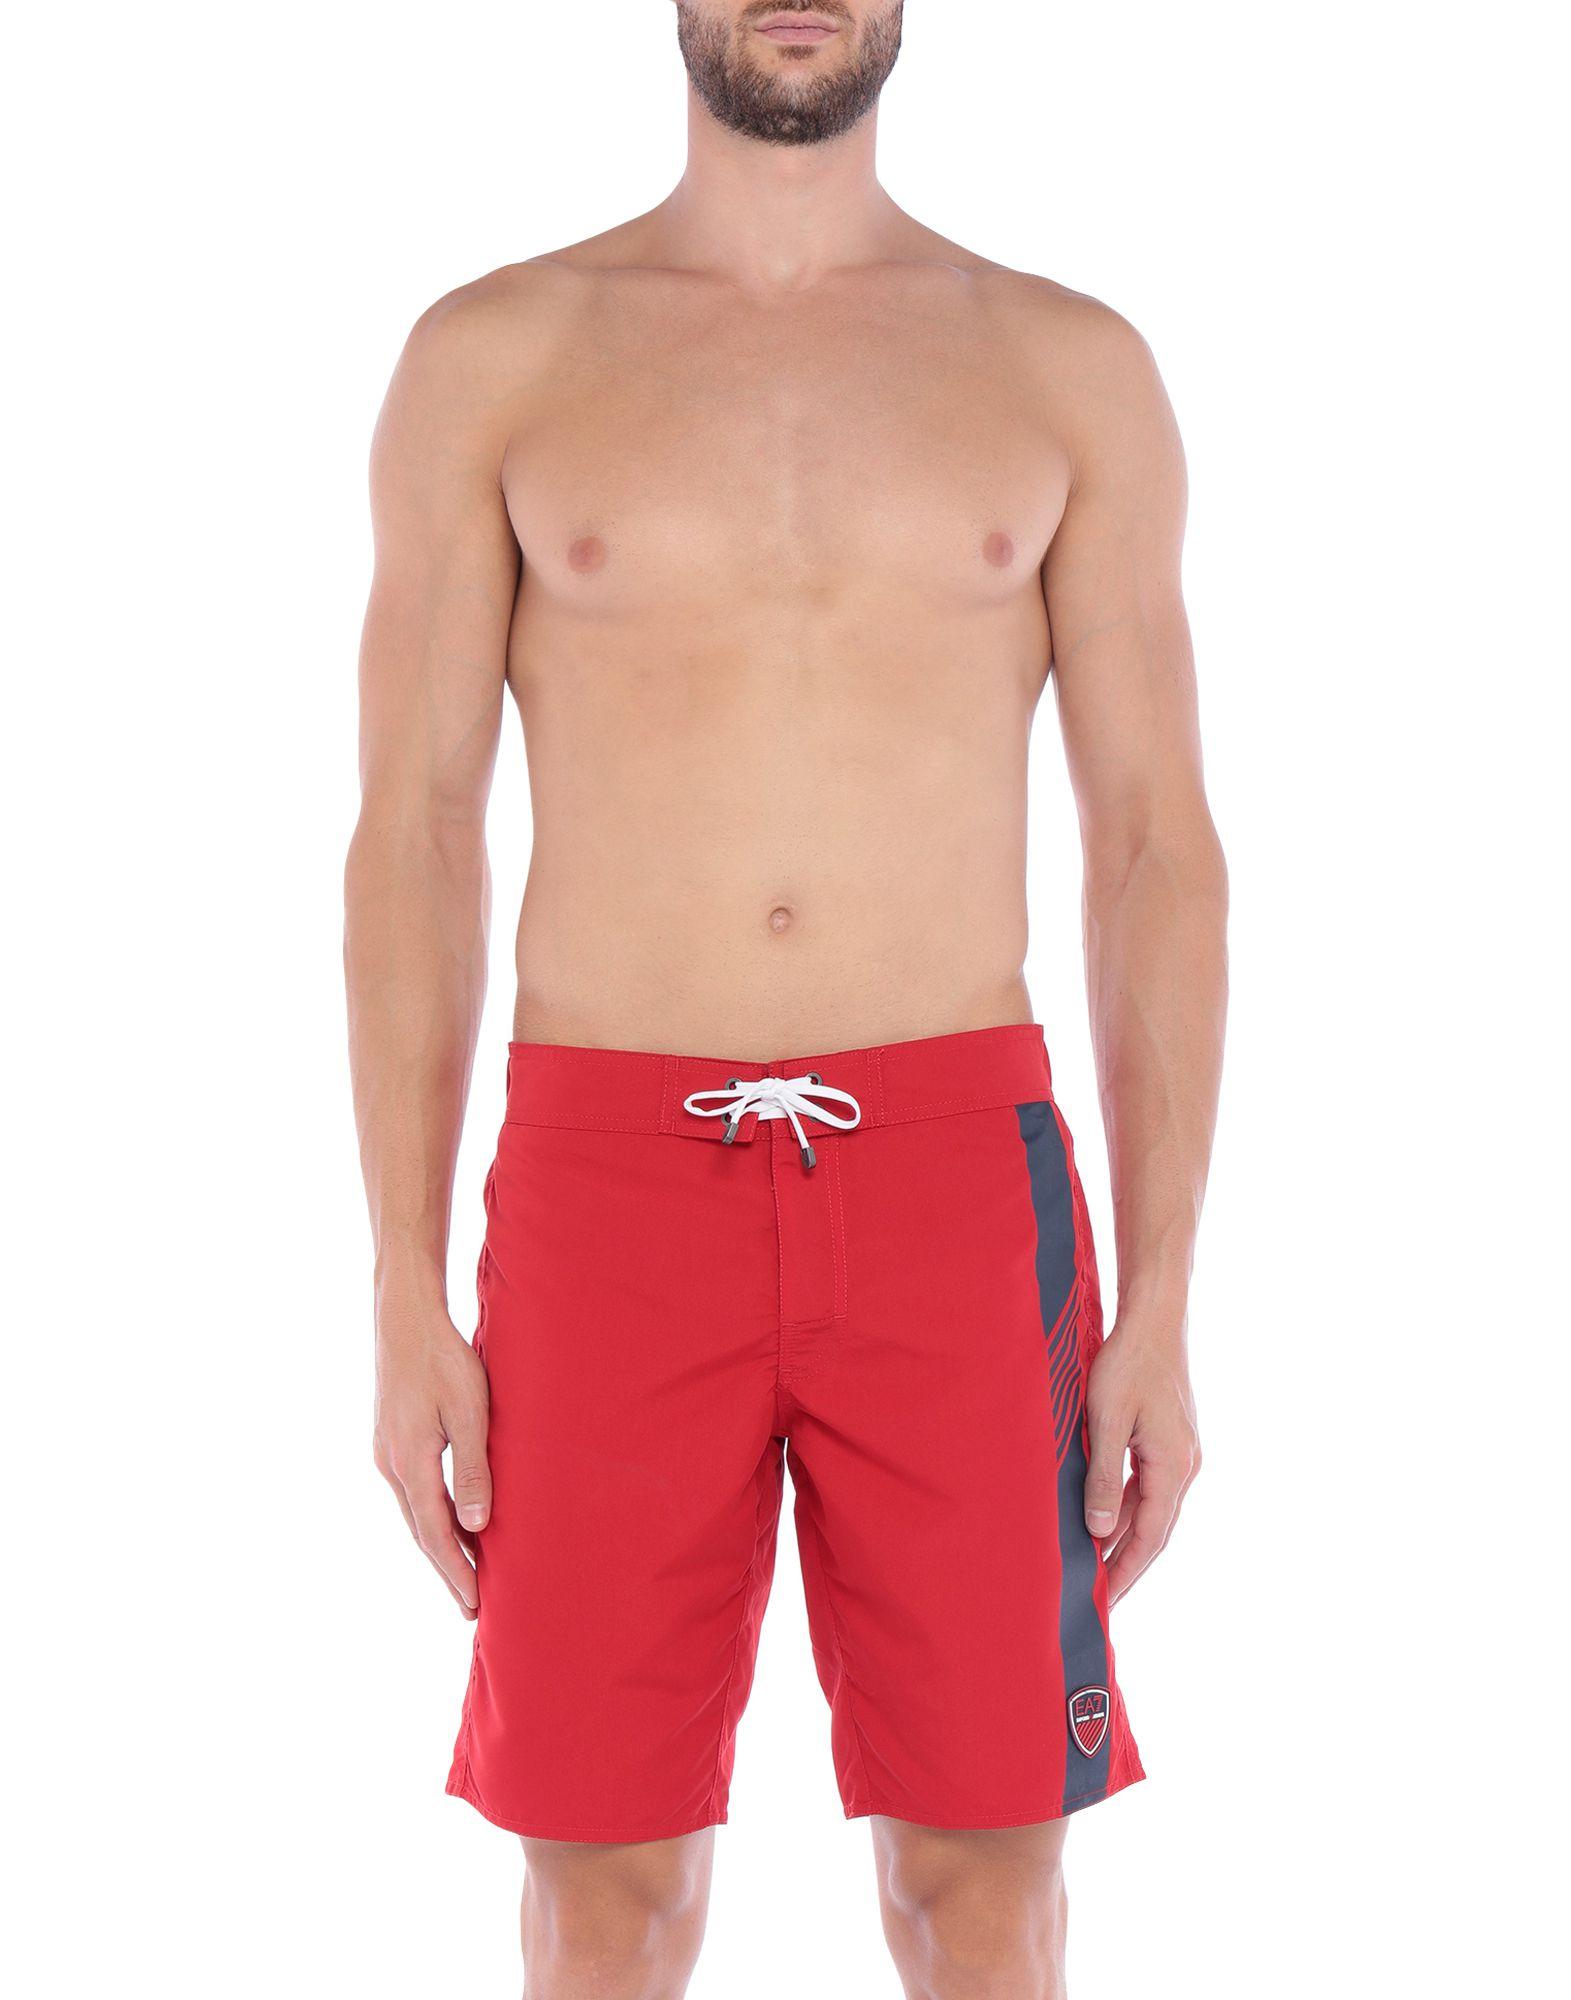 EA7 Synthetic Swimming Trunks in Red for Men - Lyst